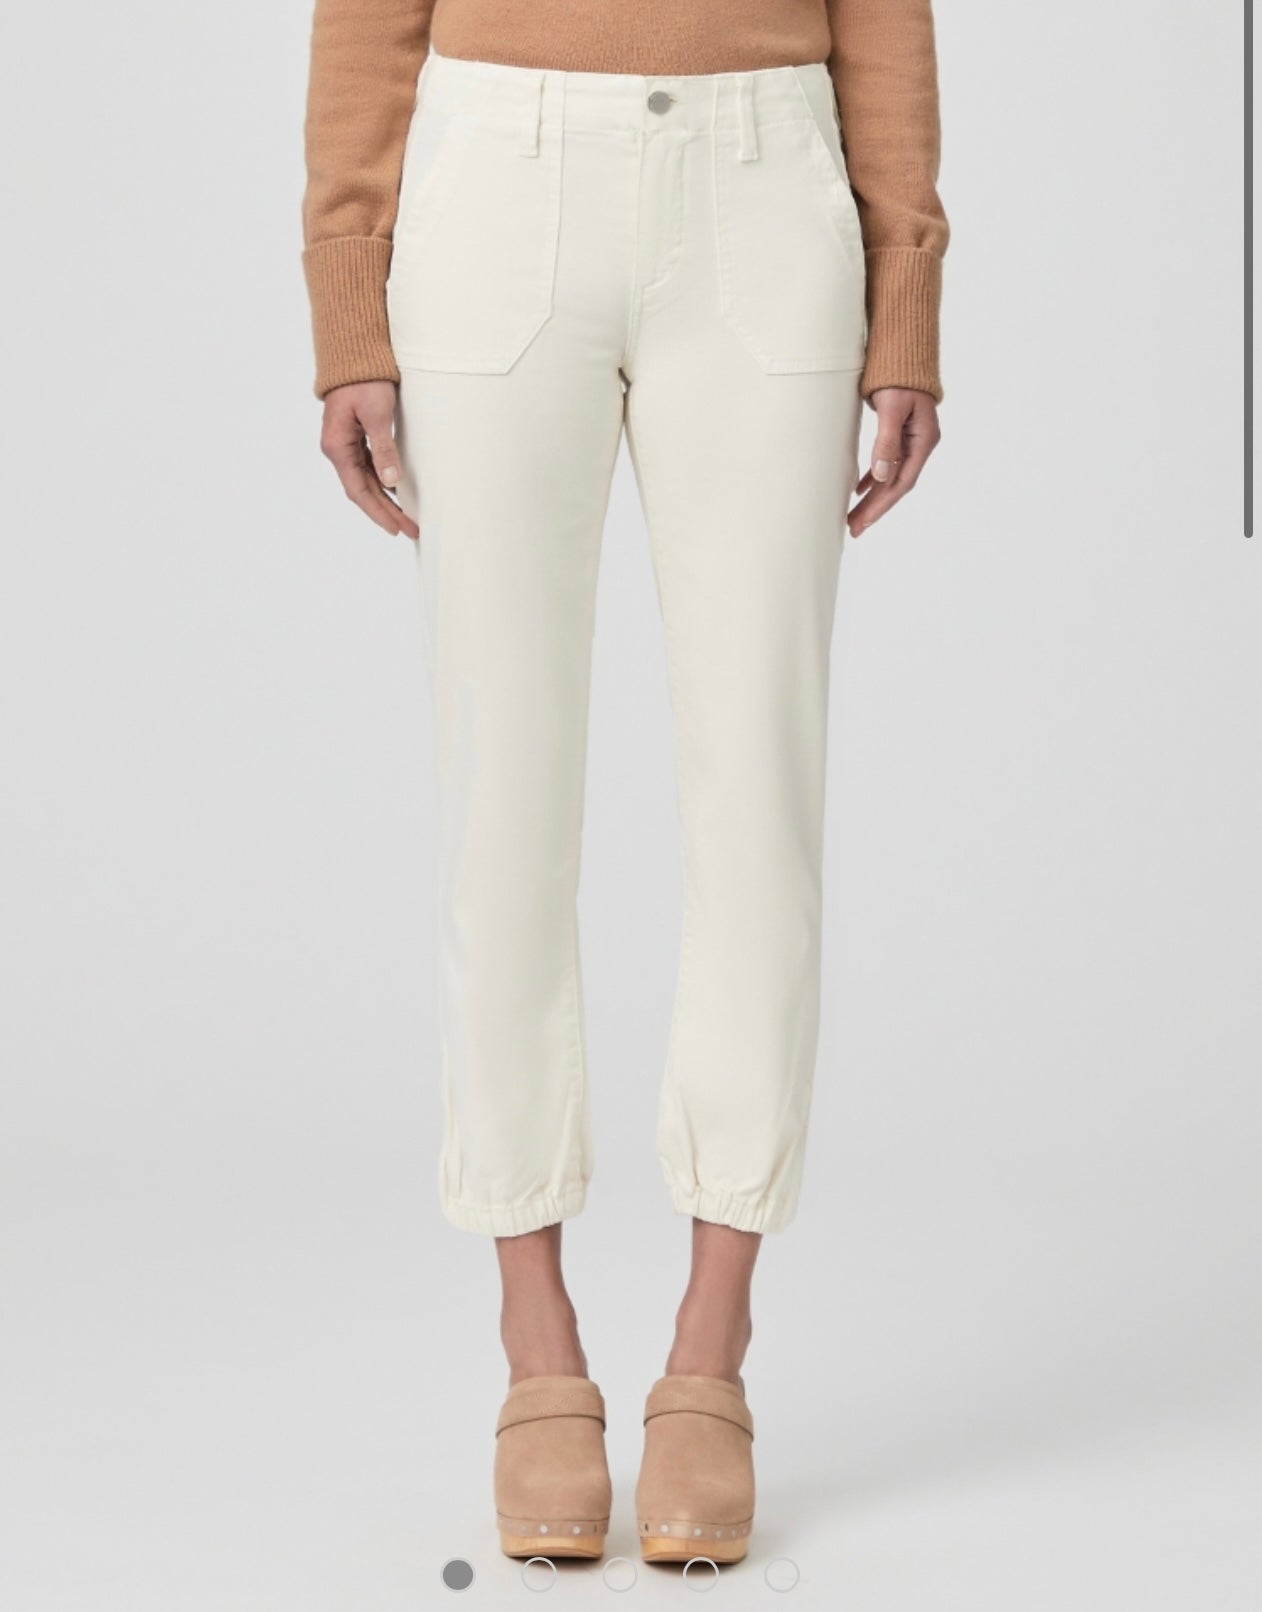 PAIGE Mayslie Jogger in White (Size 29)